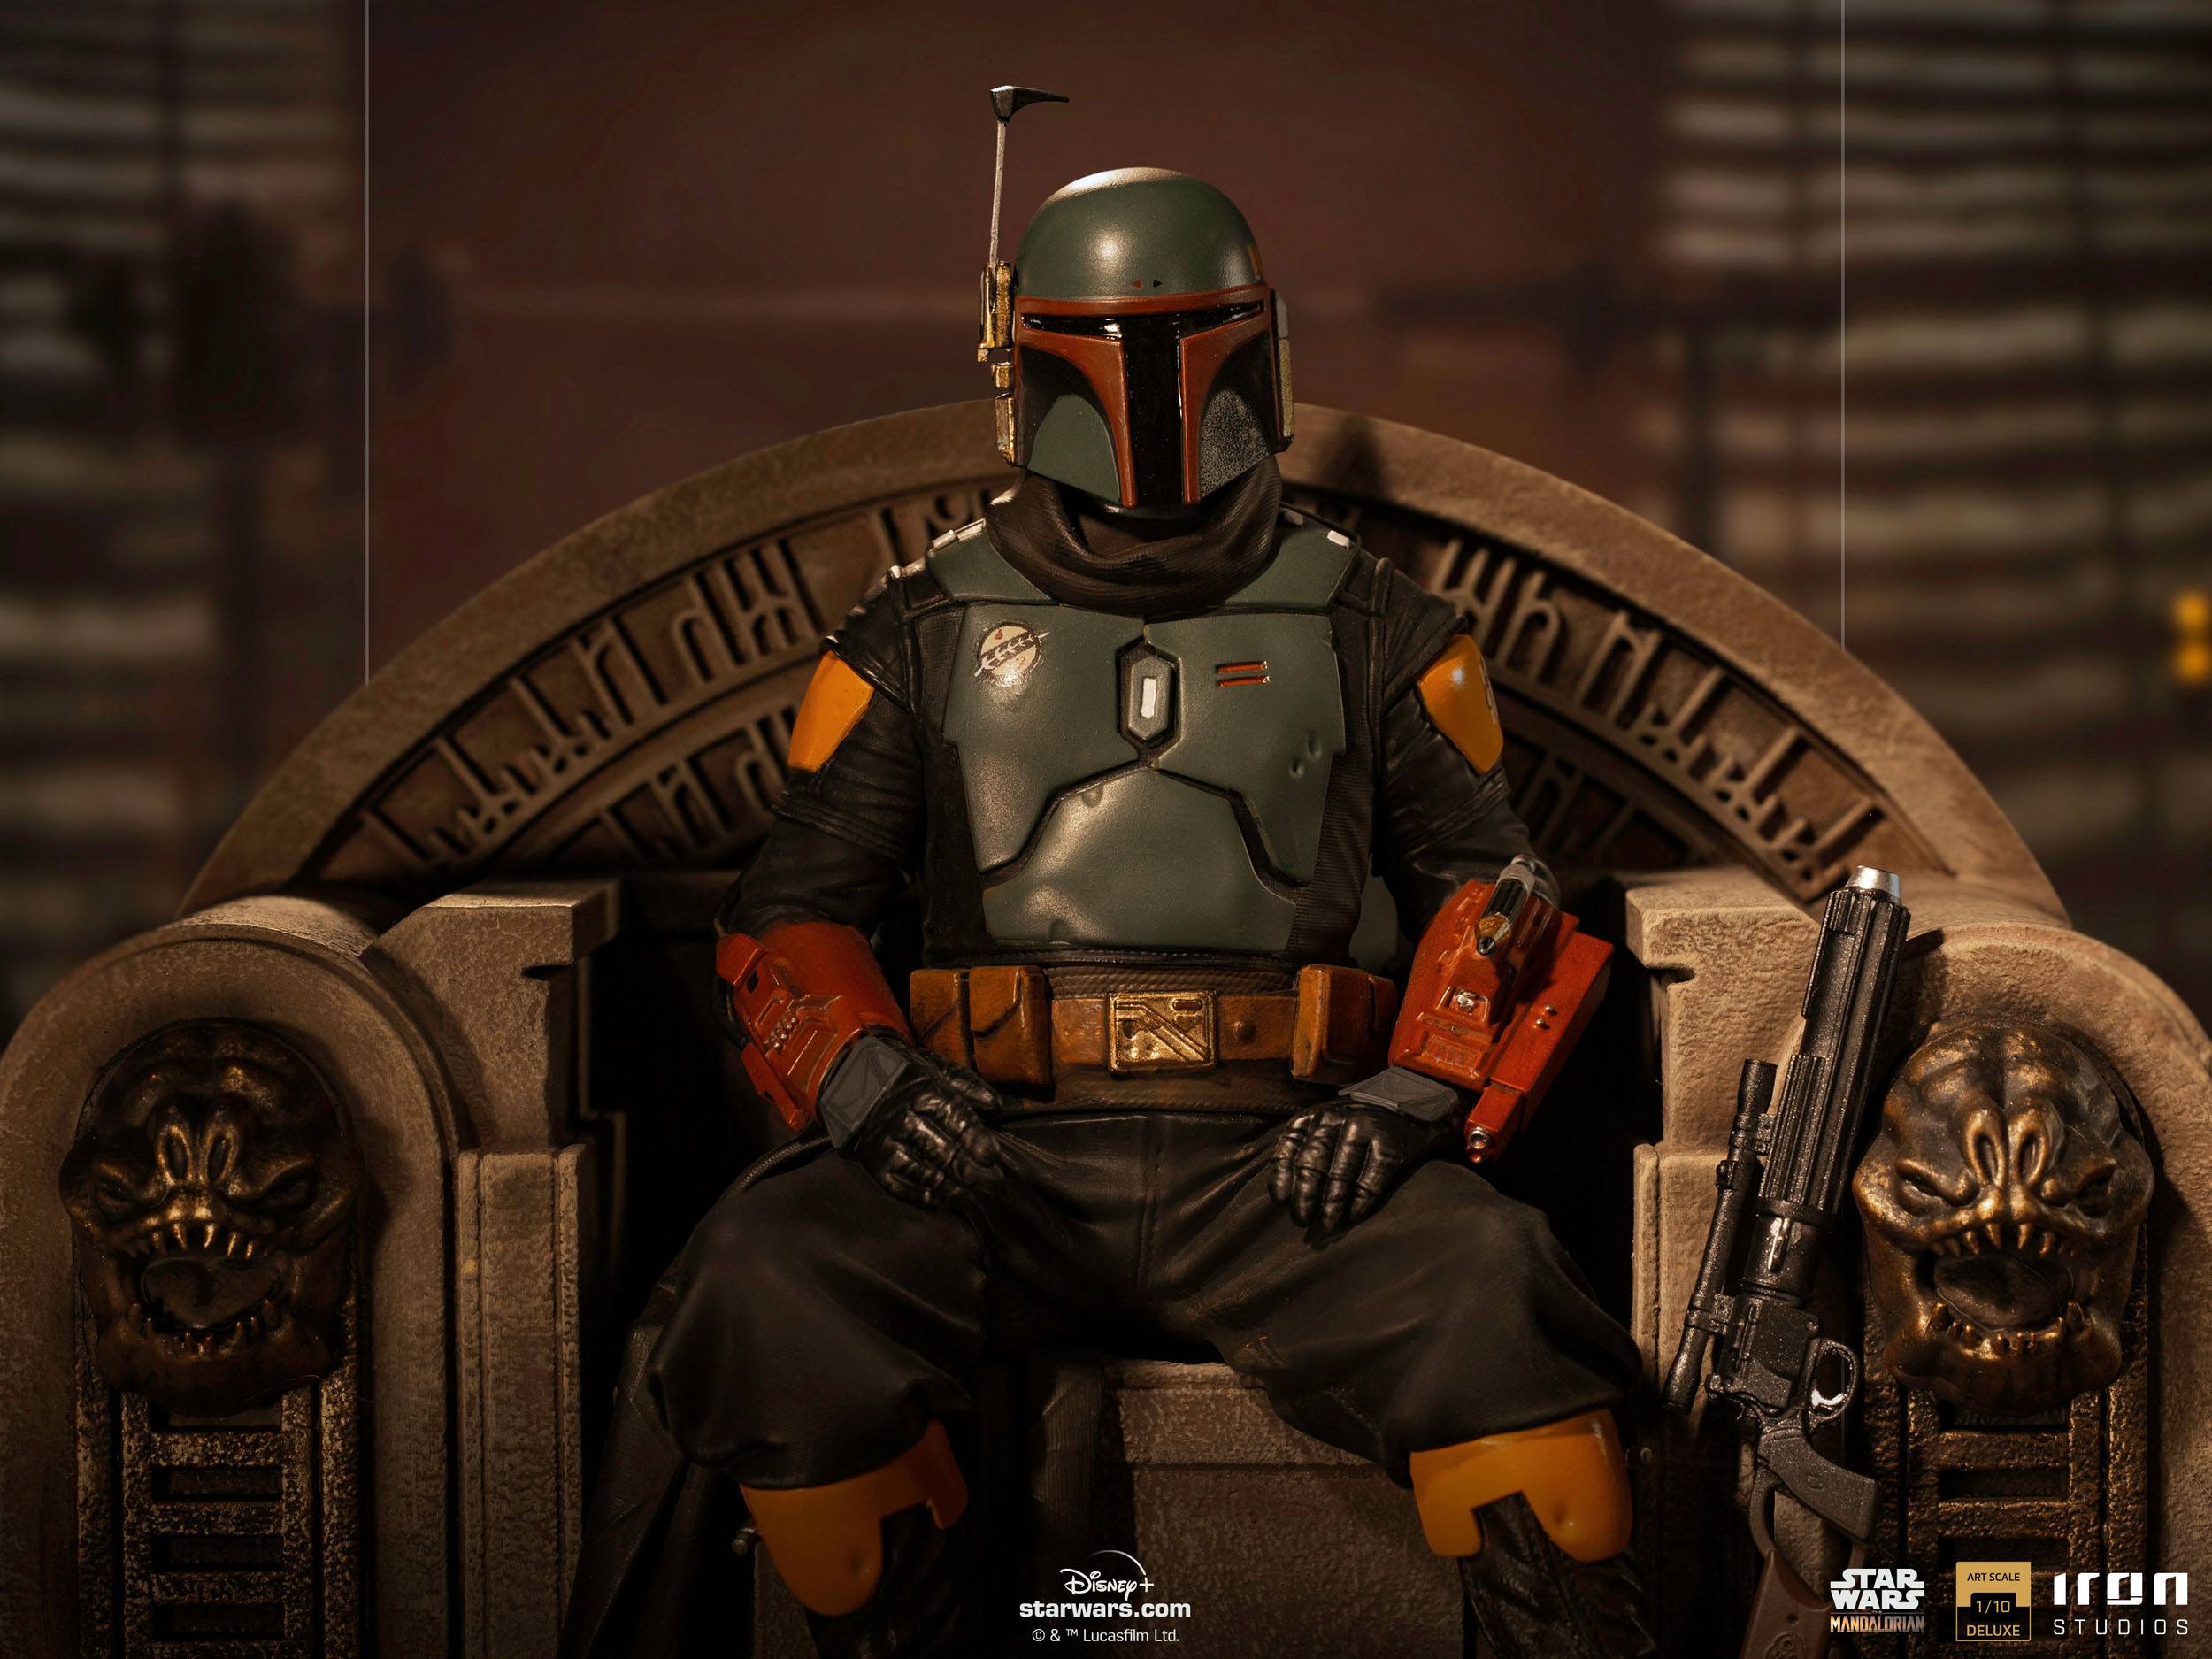 Star Wars The Mandalorian Deluxe Art Scale Statue 1/10 Boba Fett on Throne 18 cm LUCSWR45621-10 609963128099